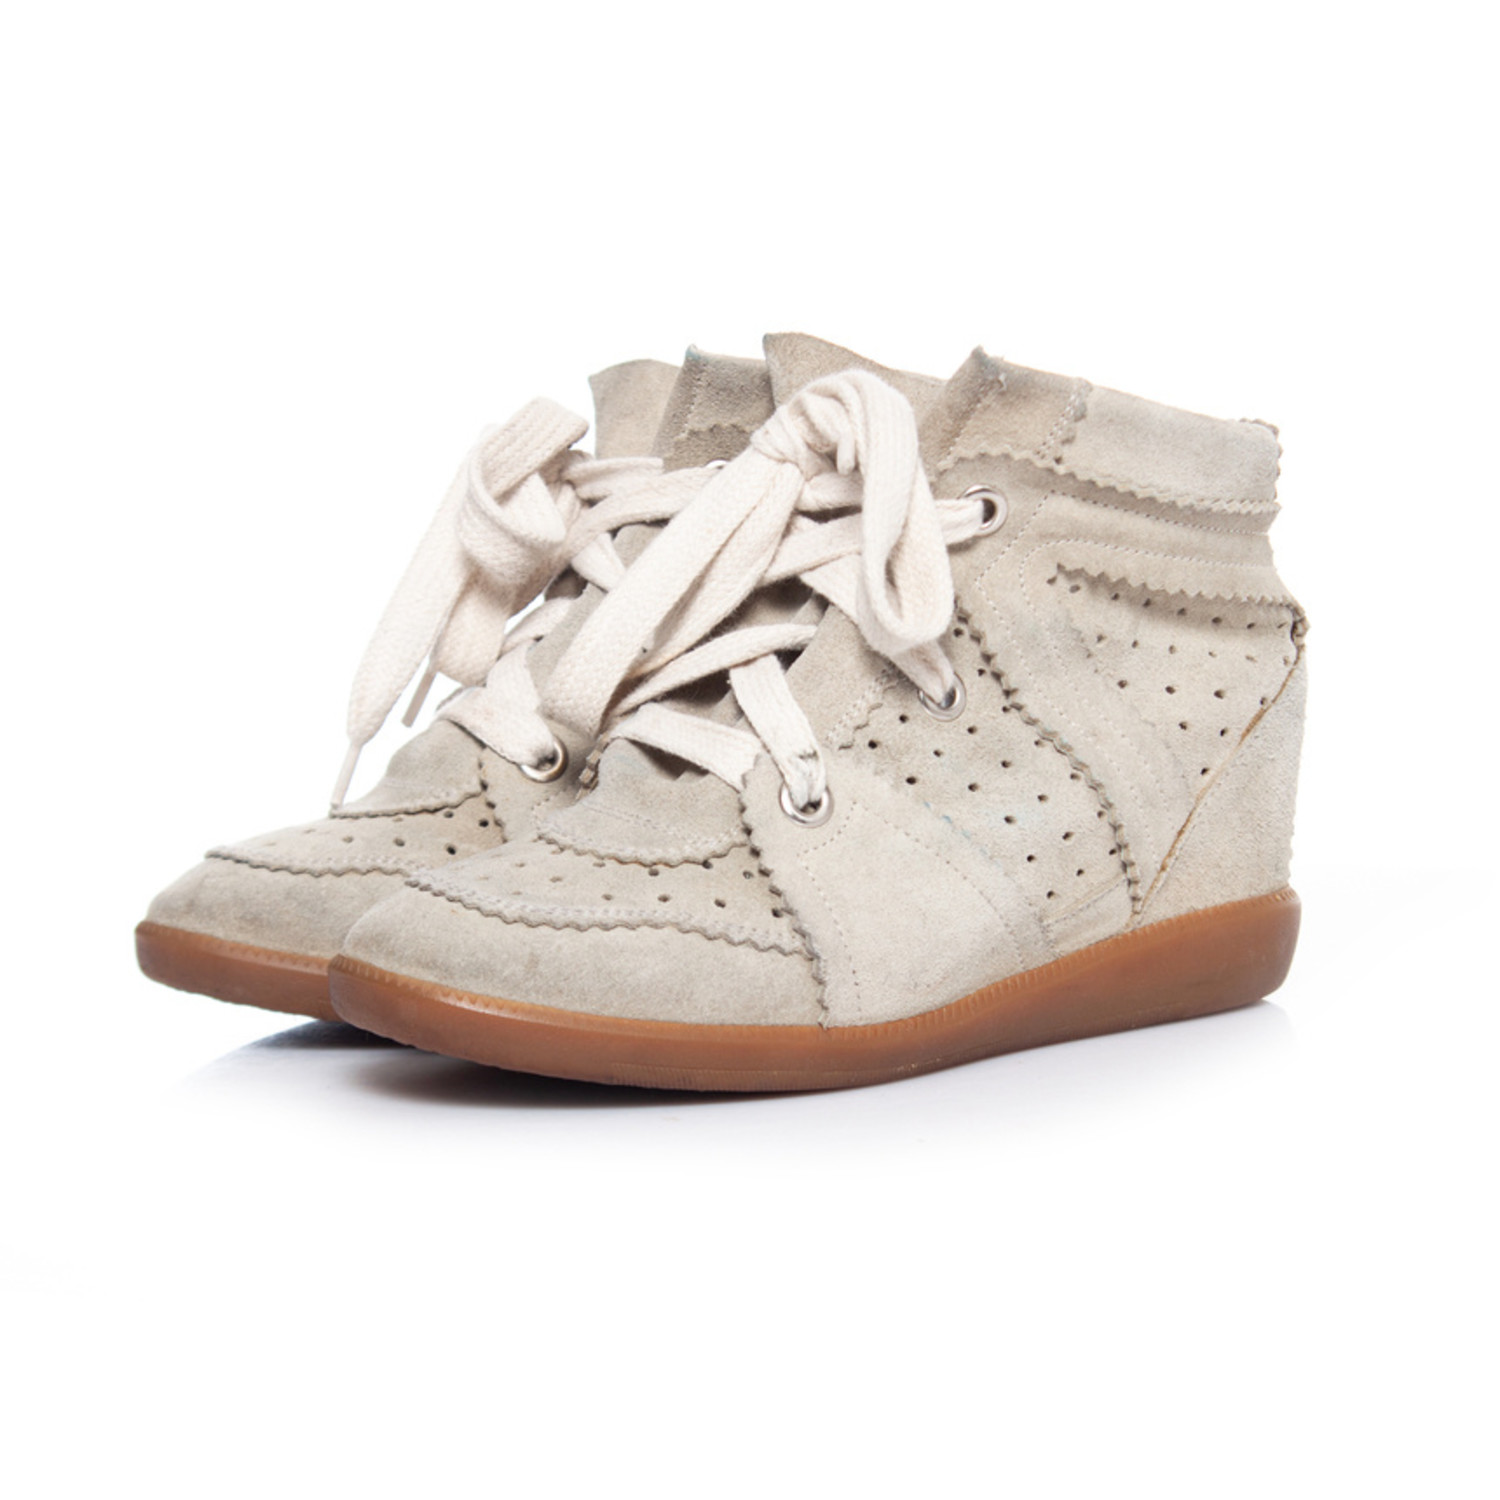 Isabel Marant, Bobby sneakers in - Unique Pieces